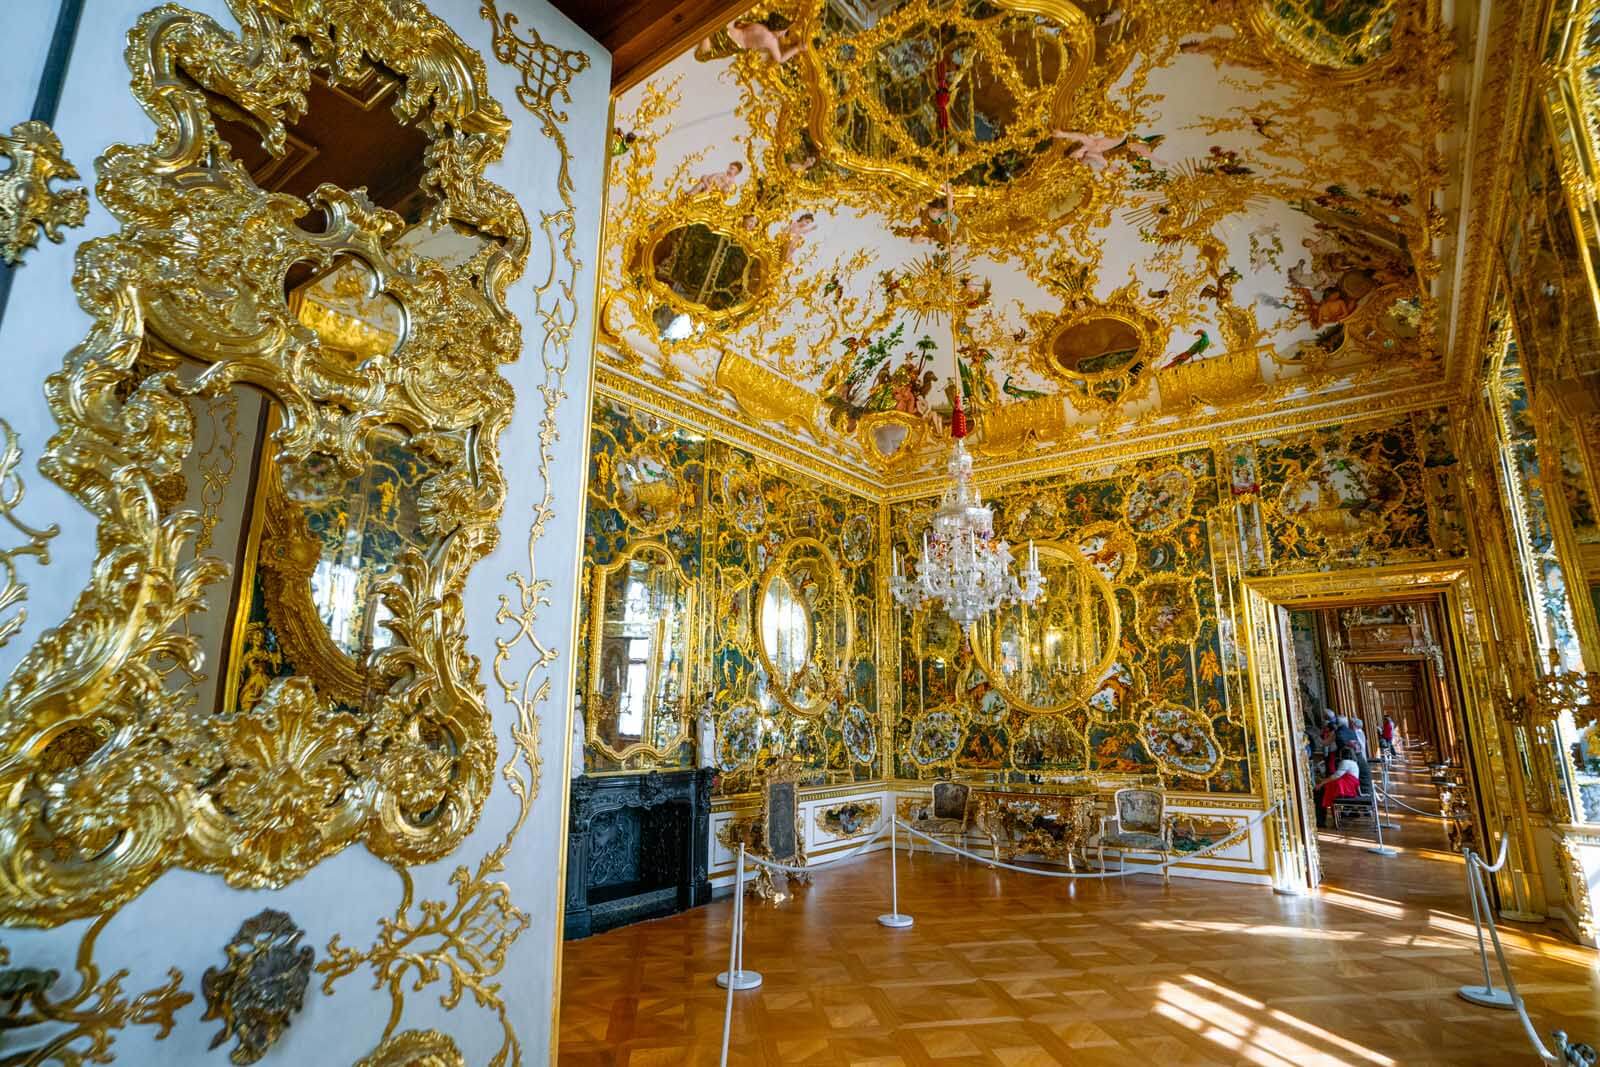 Room of Mirrors in Würzburg Residence in Germany